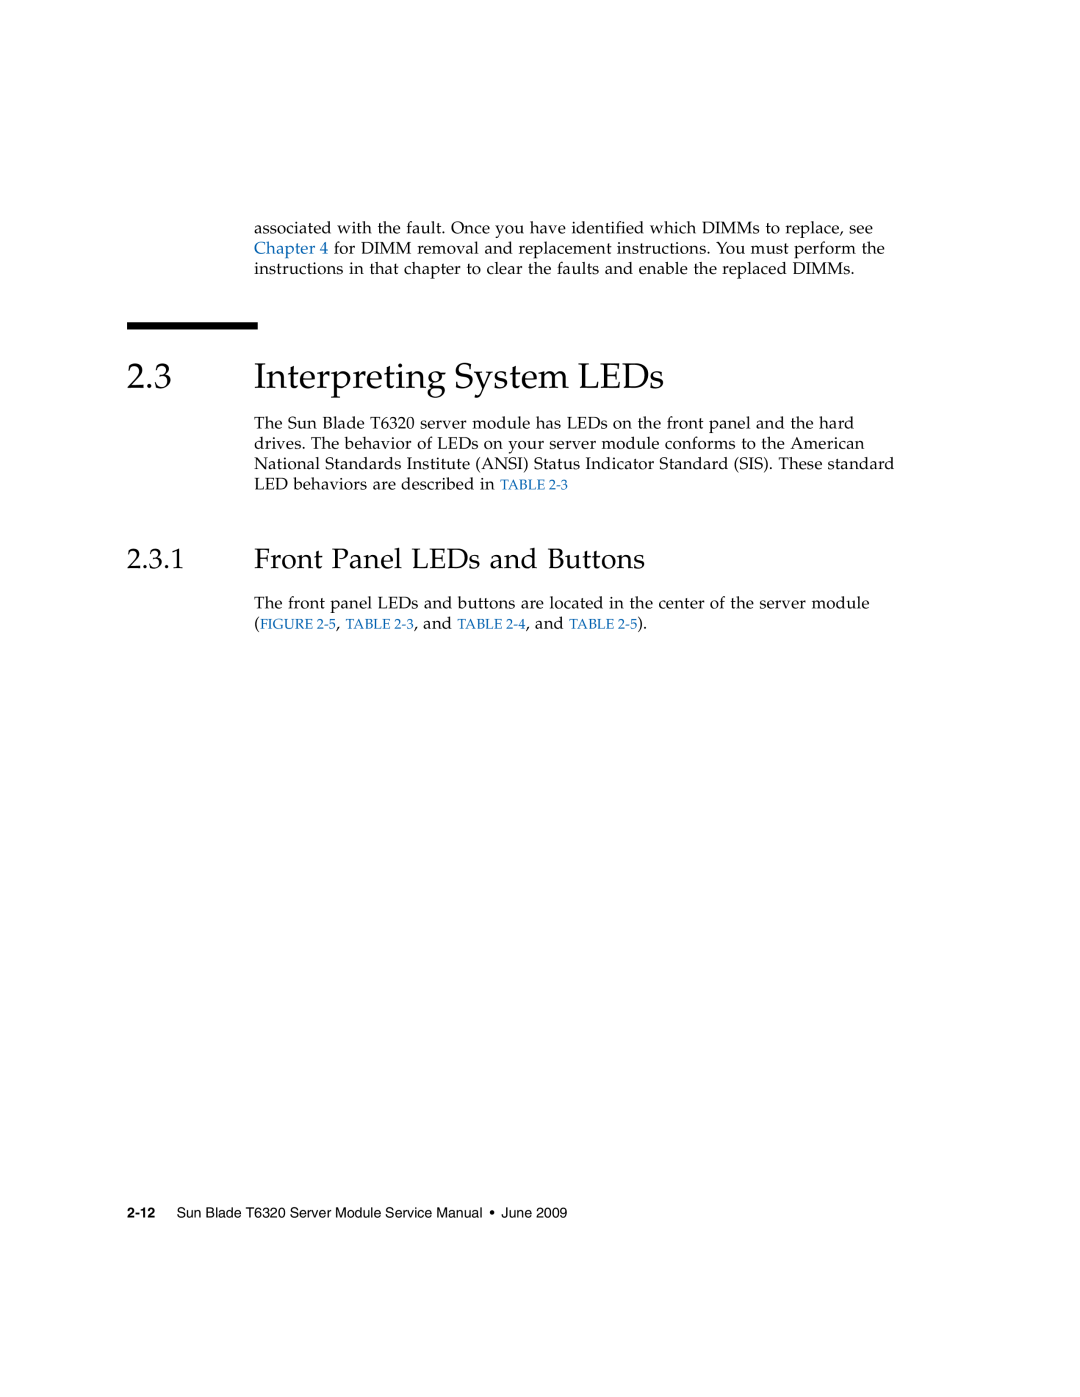 Sun Microsystems T6320 service manual Interpreting System LEDs, Front Panel LEDs and Buttons 